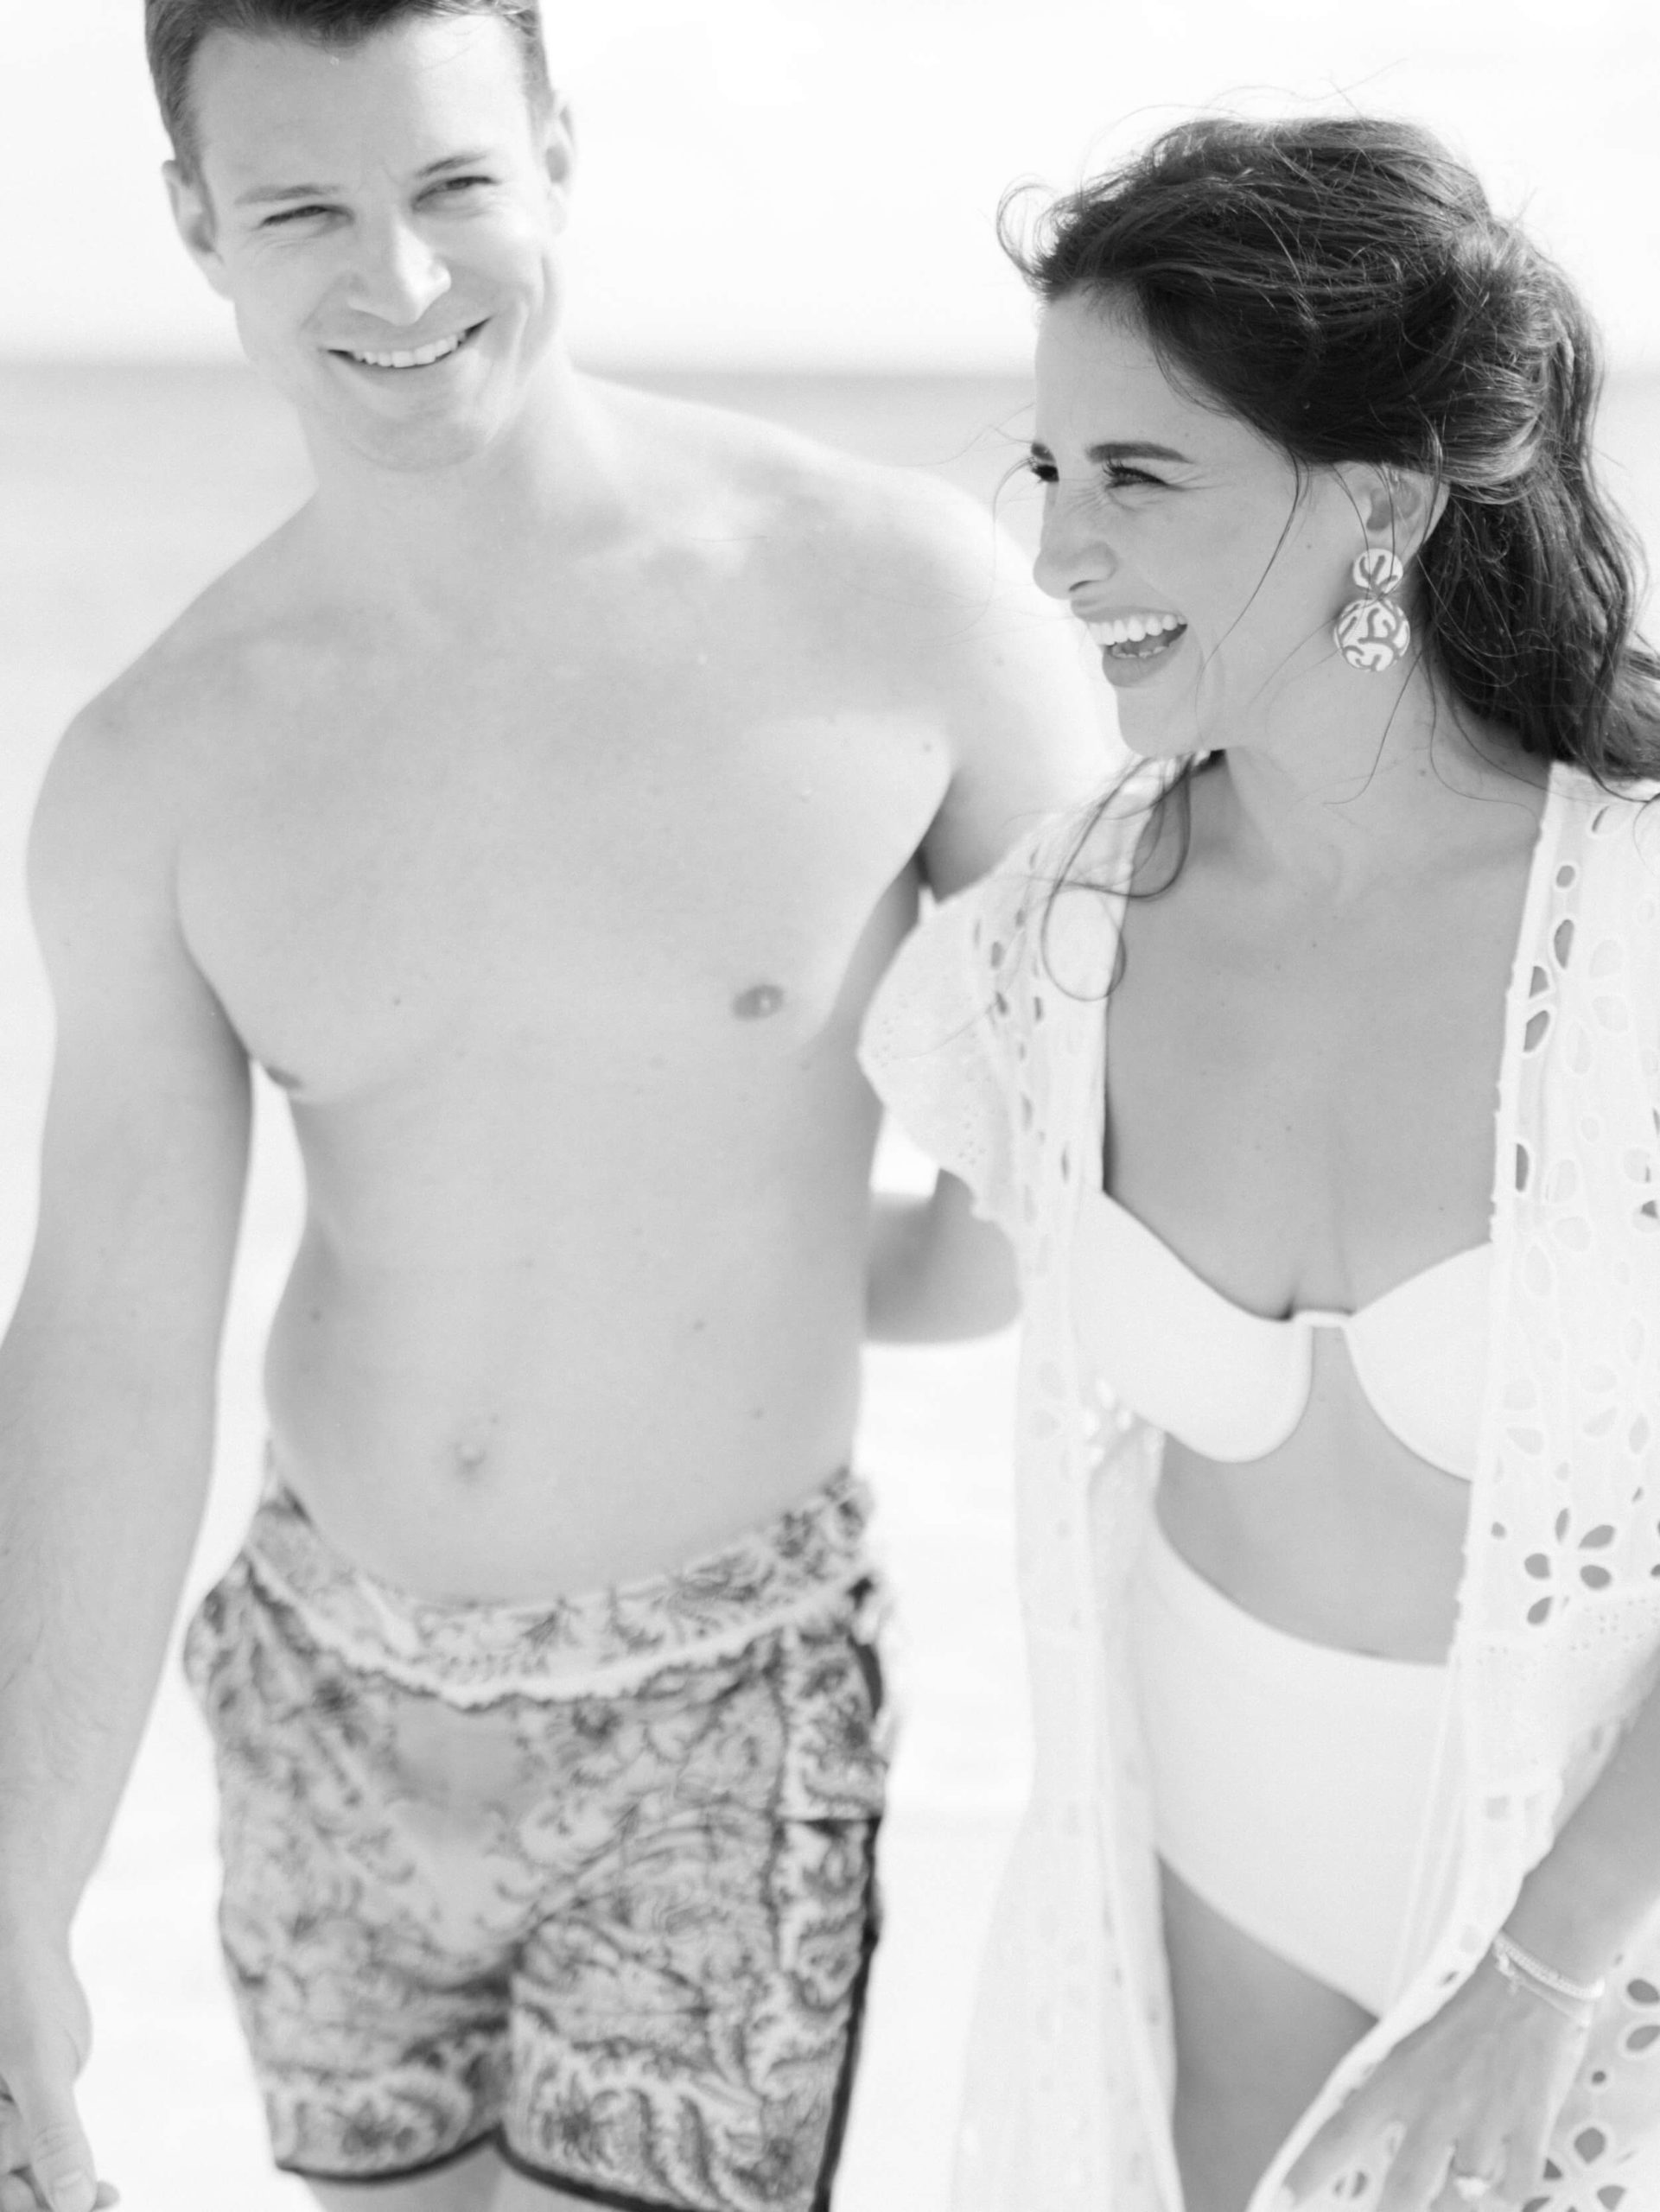 Liz and Dave laughing in their beachwear